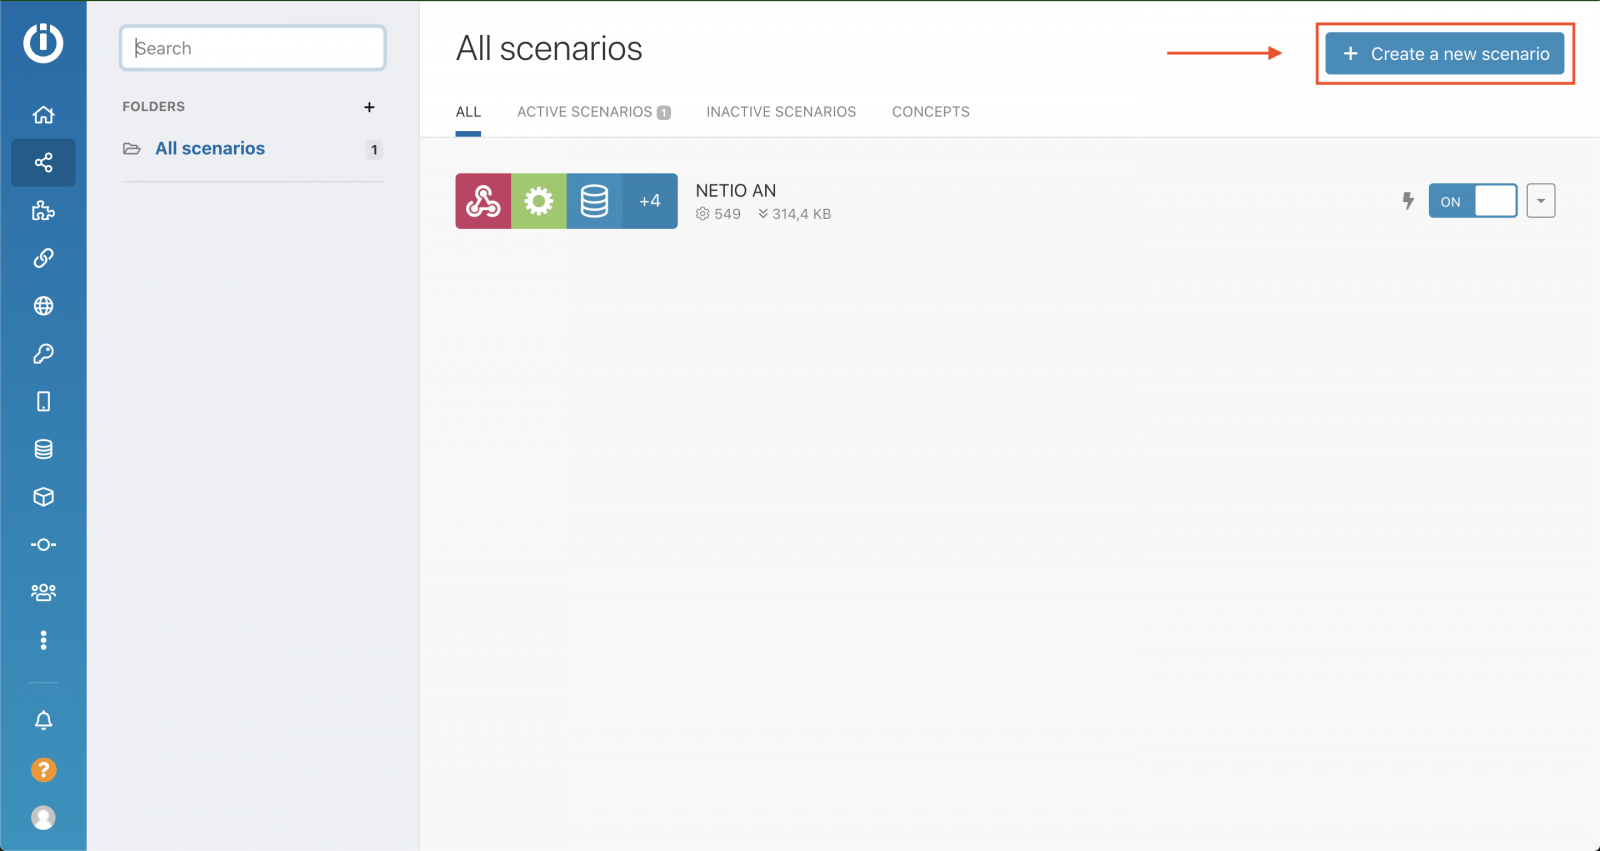 Scenarios tab overview with highlighed button for creating new scenarios